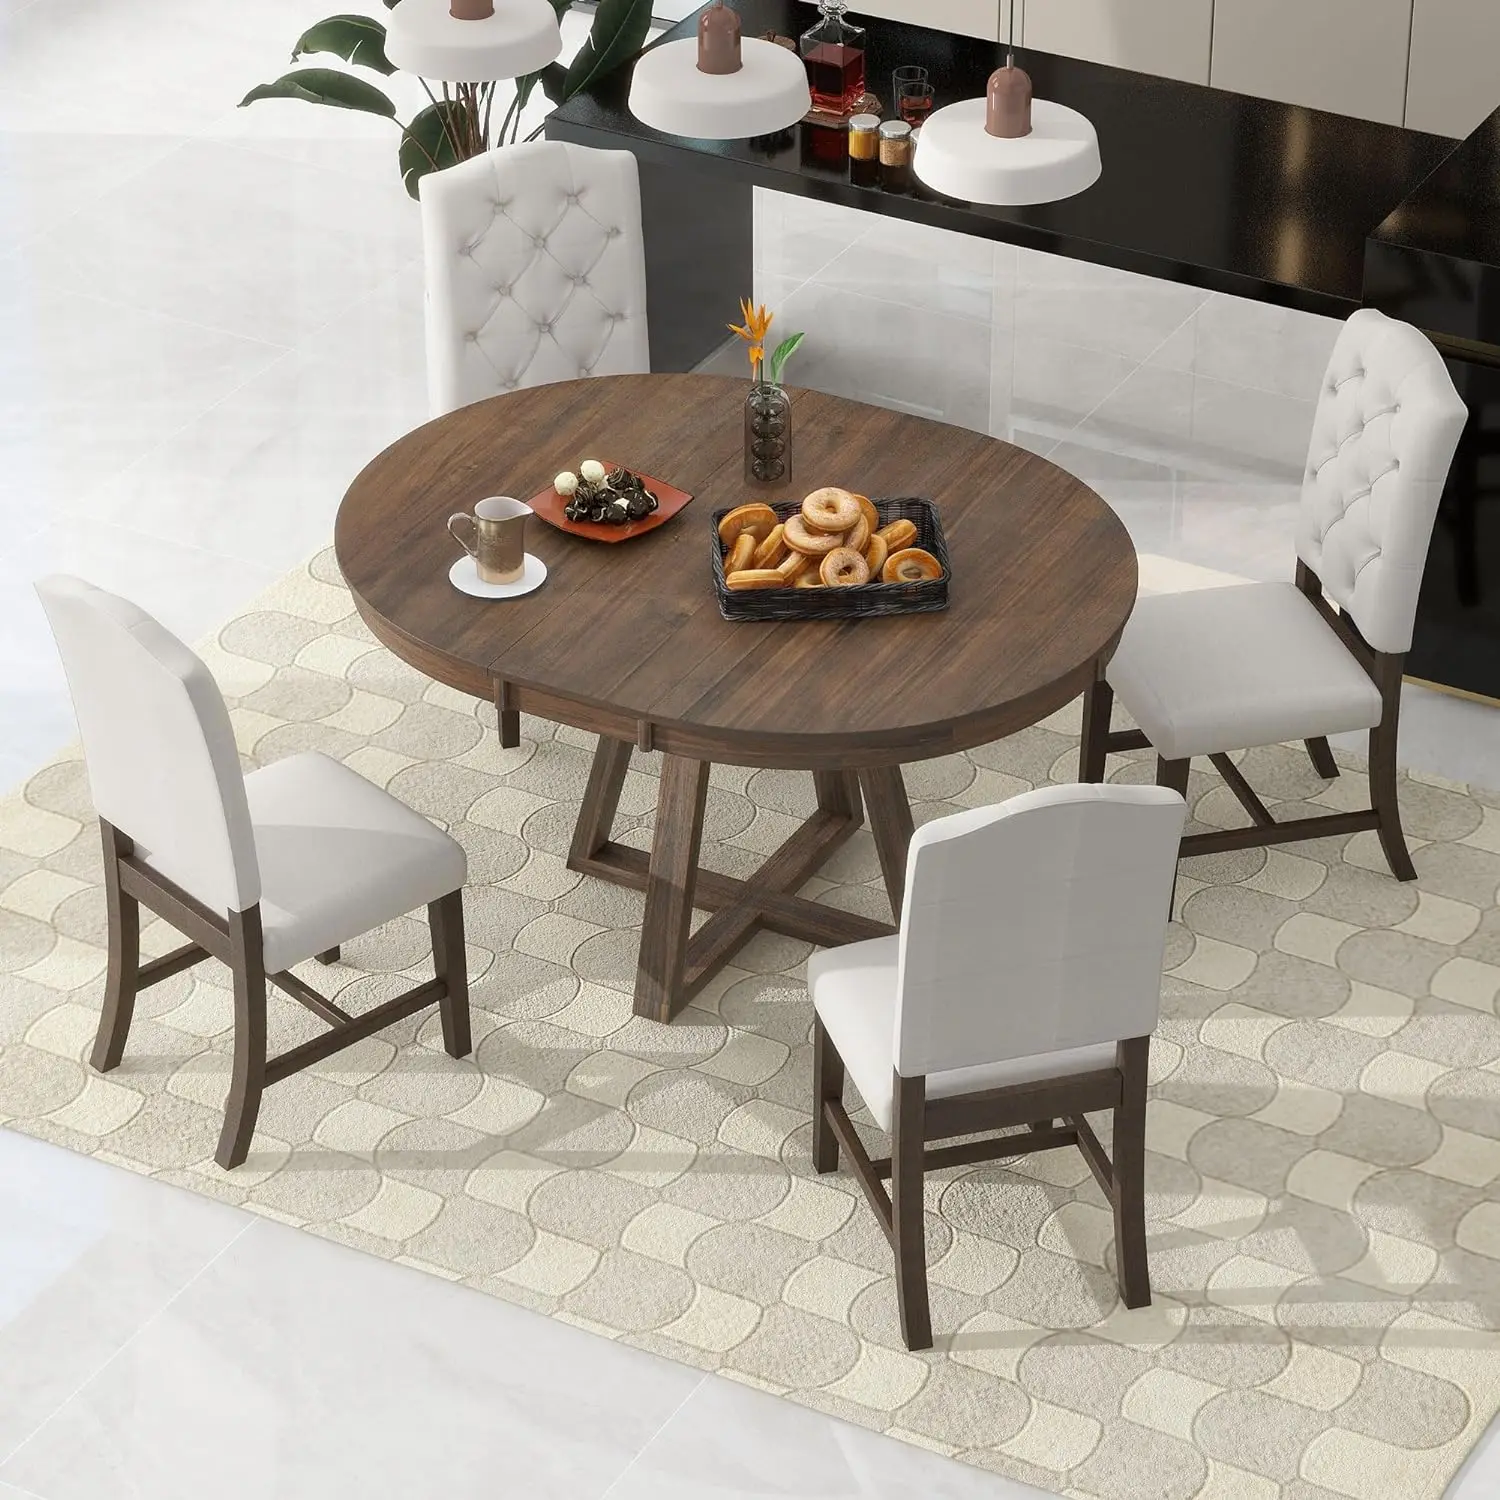 

Retro Dining Table Set for 4,5-Piece Wood Round Extendable Kitchen Table&4 Upholstered Chairs with Backrest,Walnut